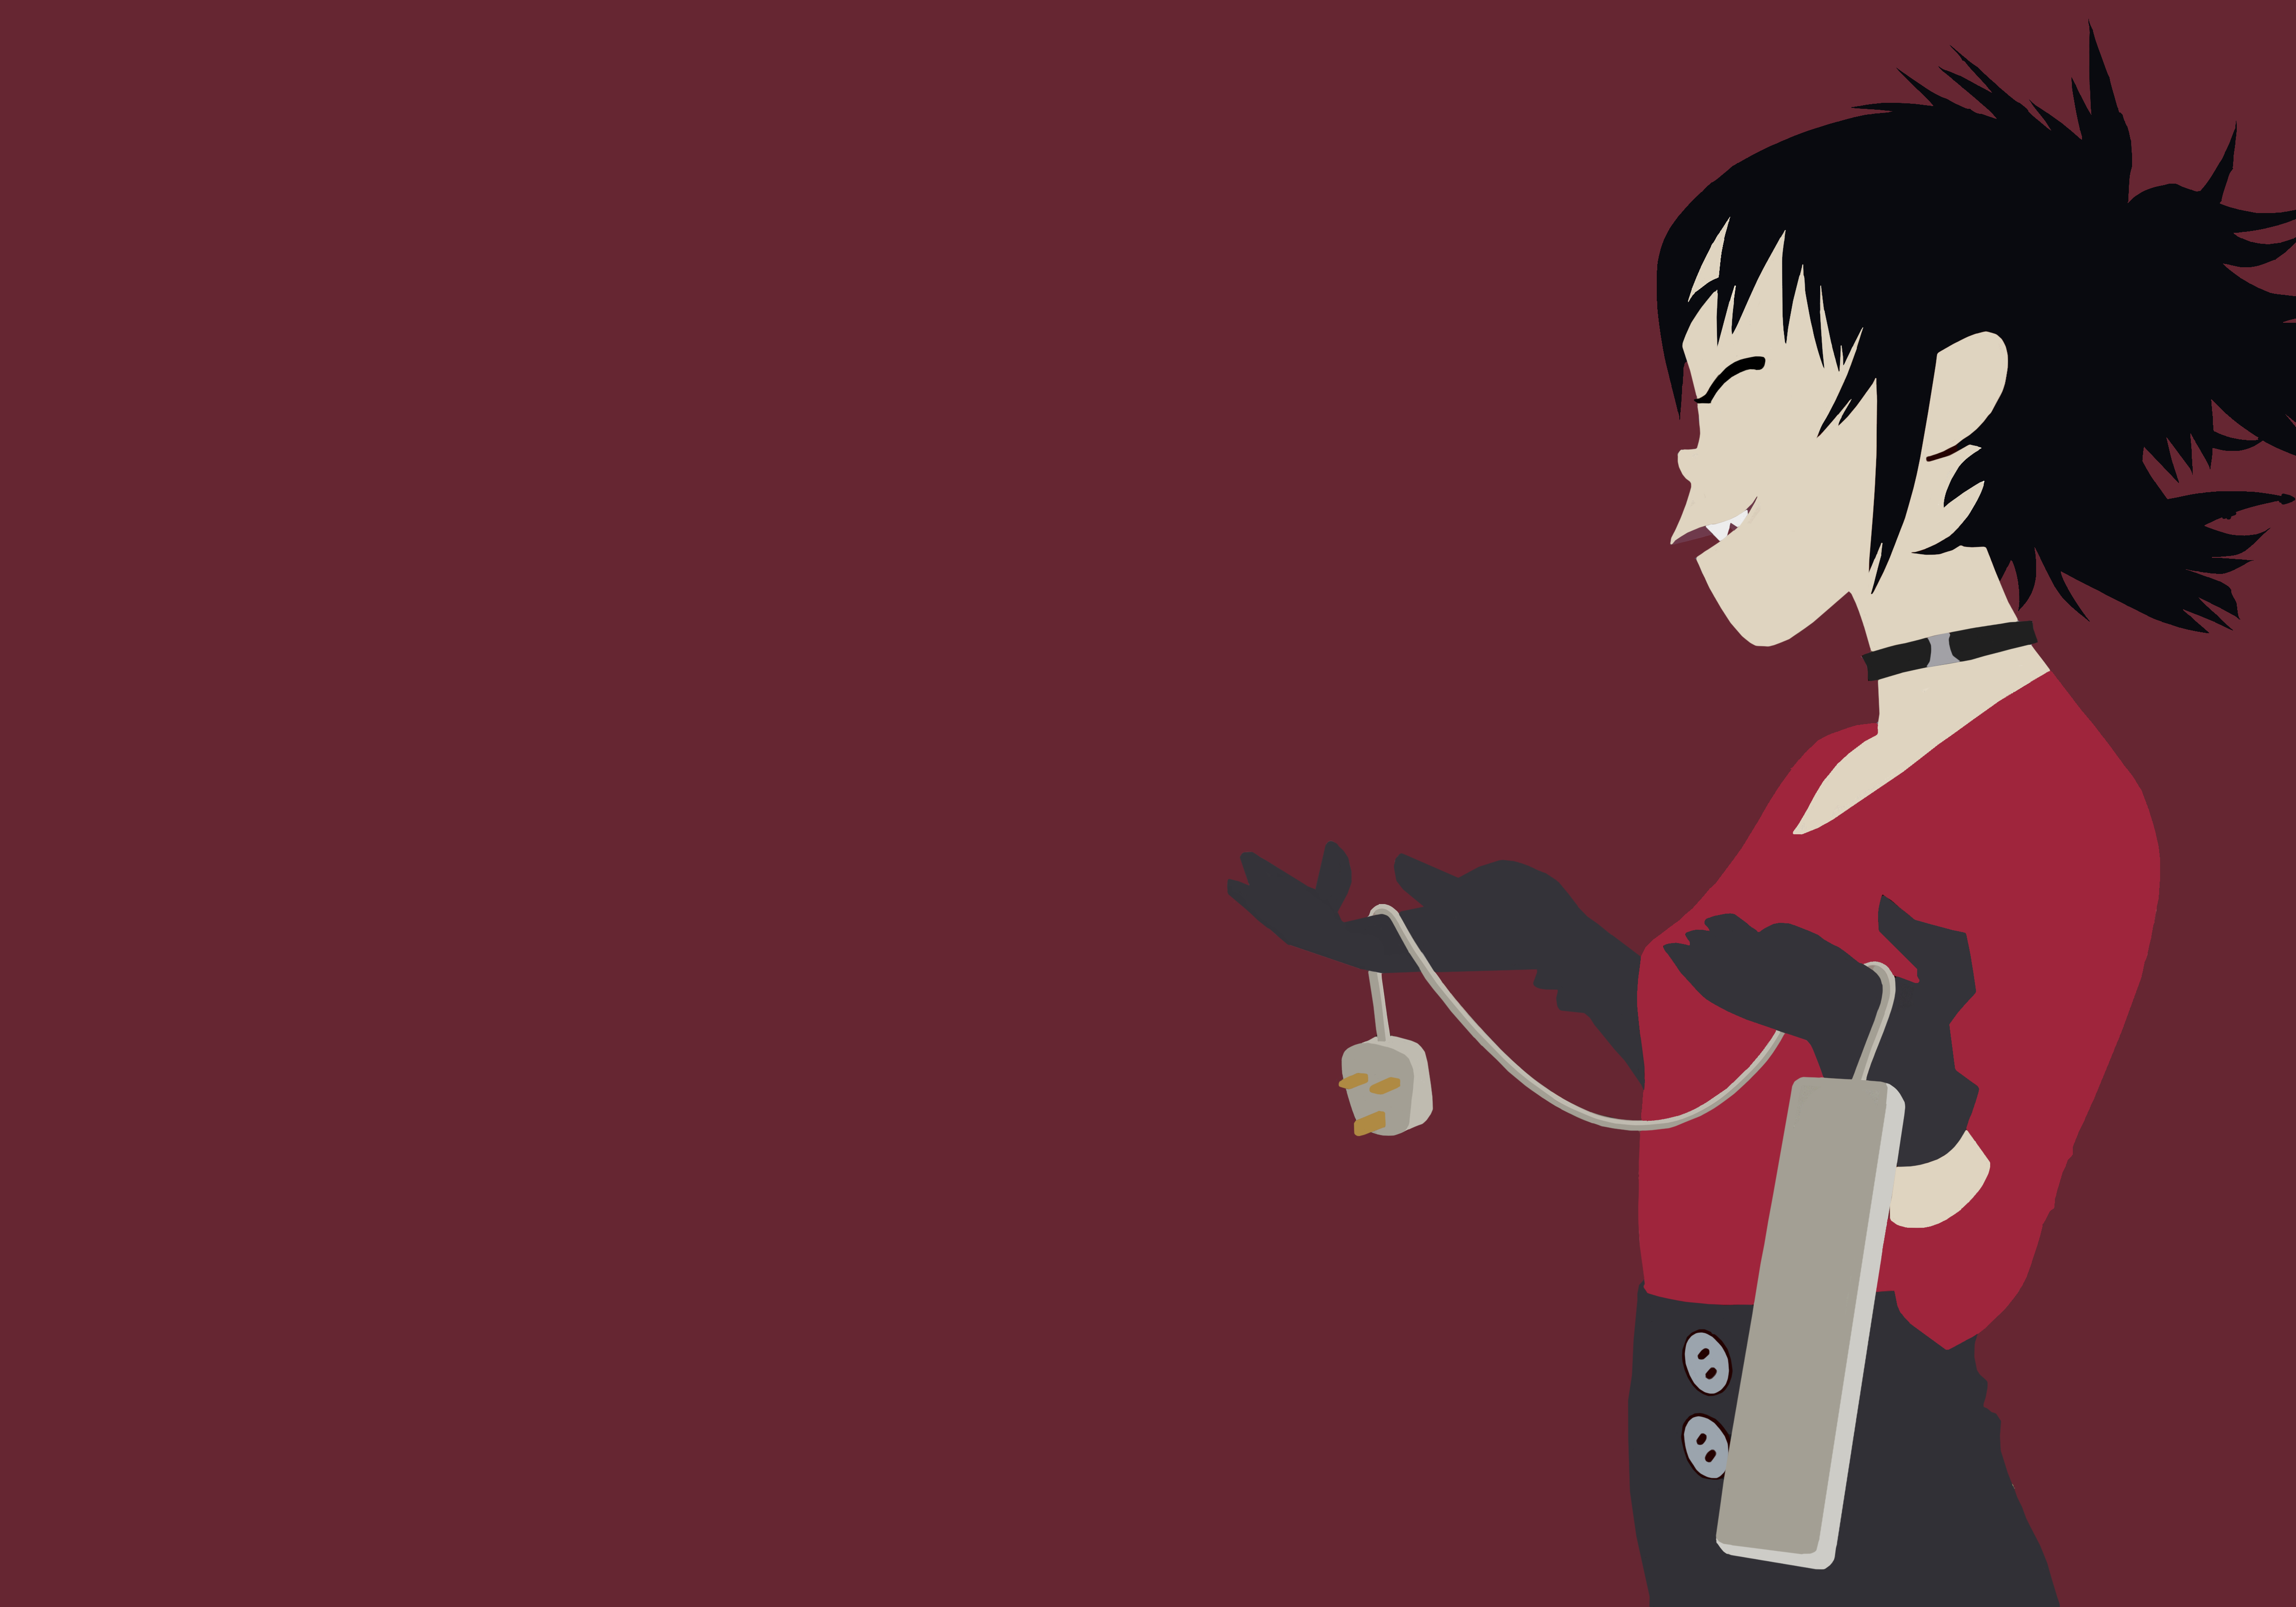 I Attempted To Make A Noodle Minimalist Wallpaper Gorillaz